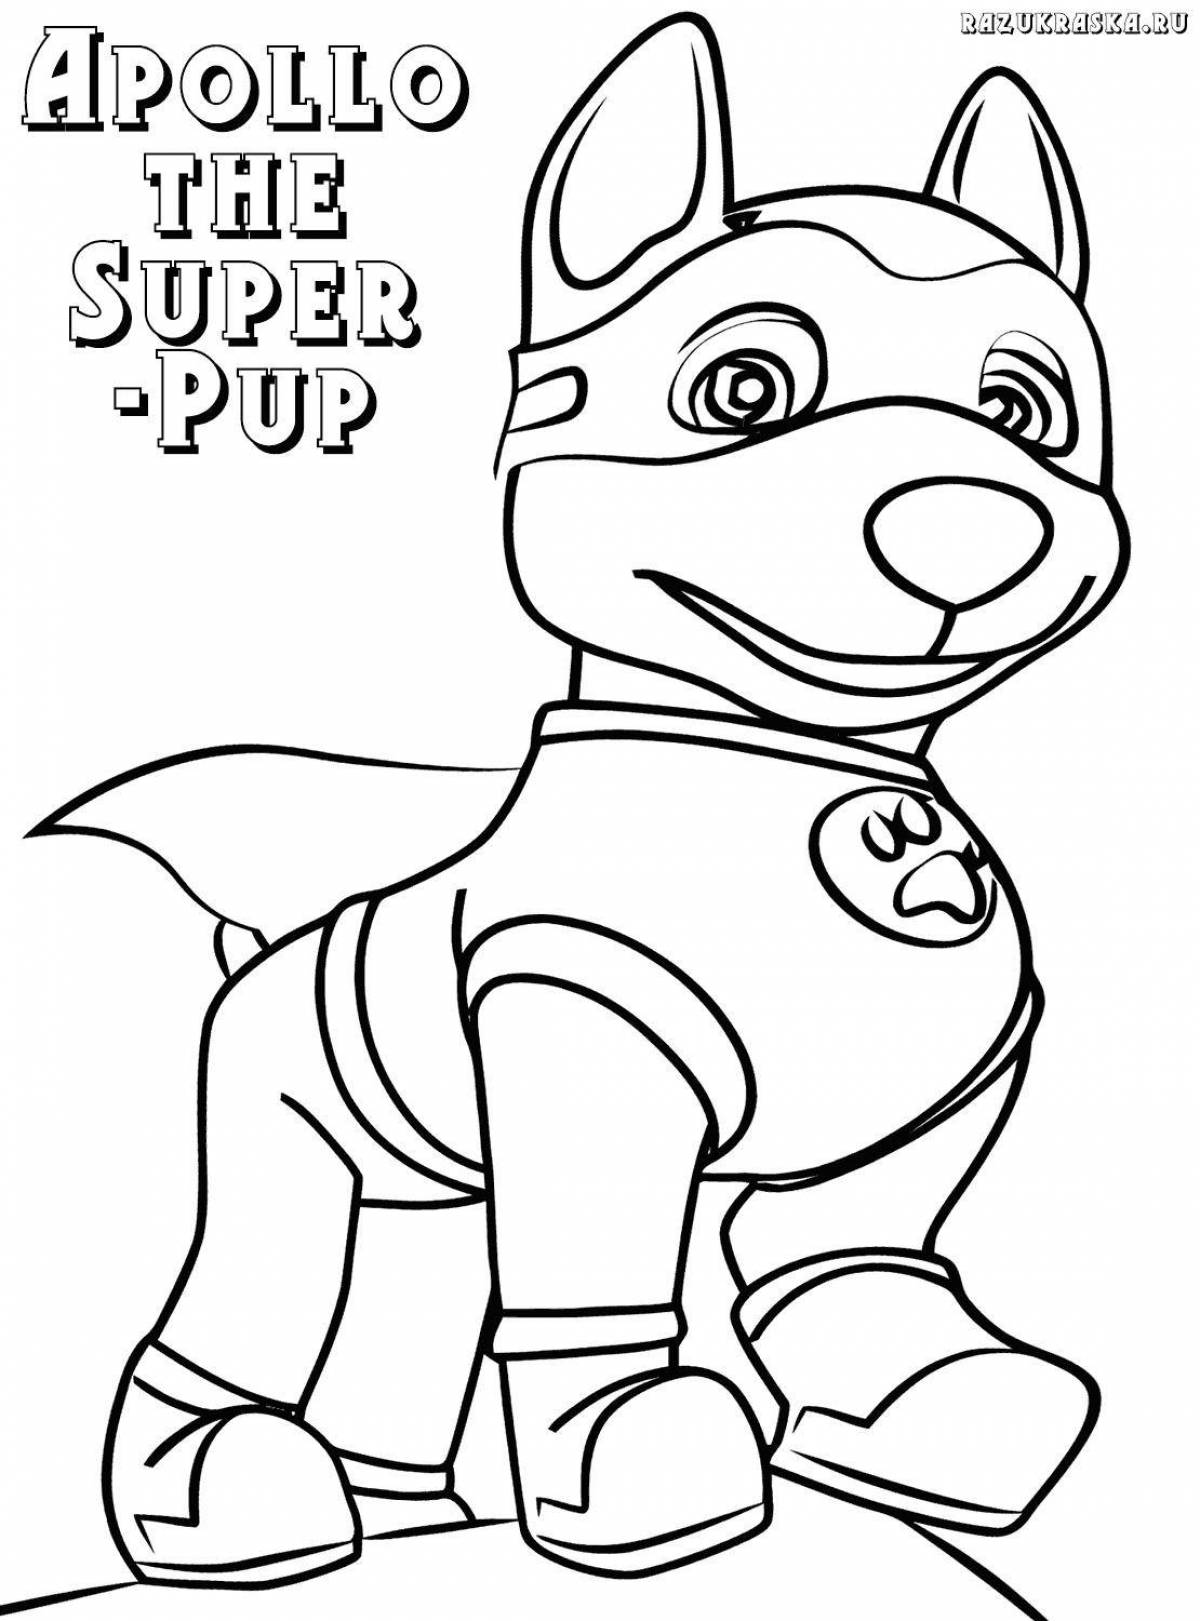 Coloring page dazzling robot dog